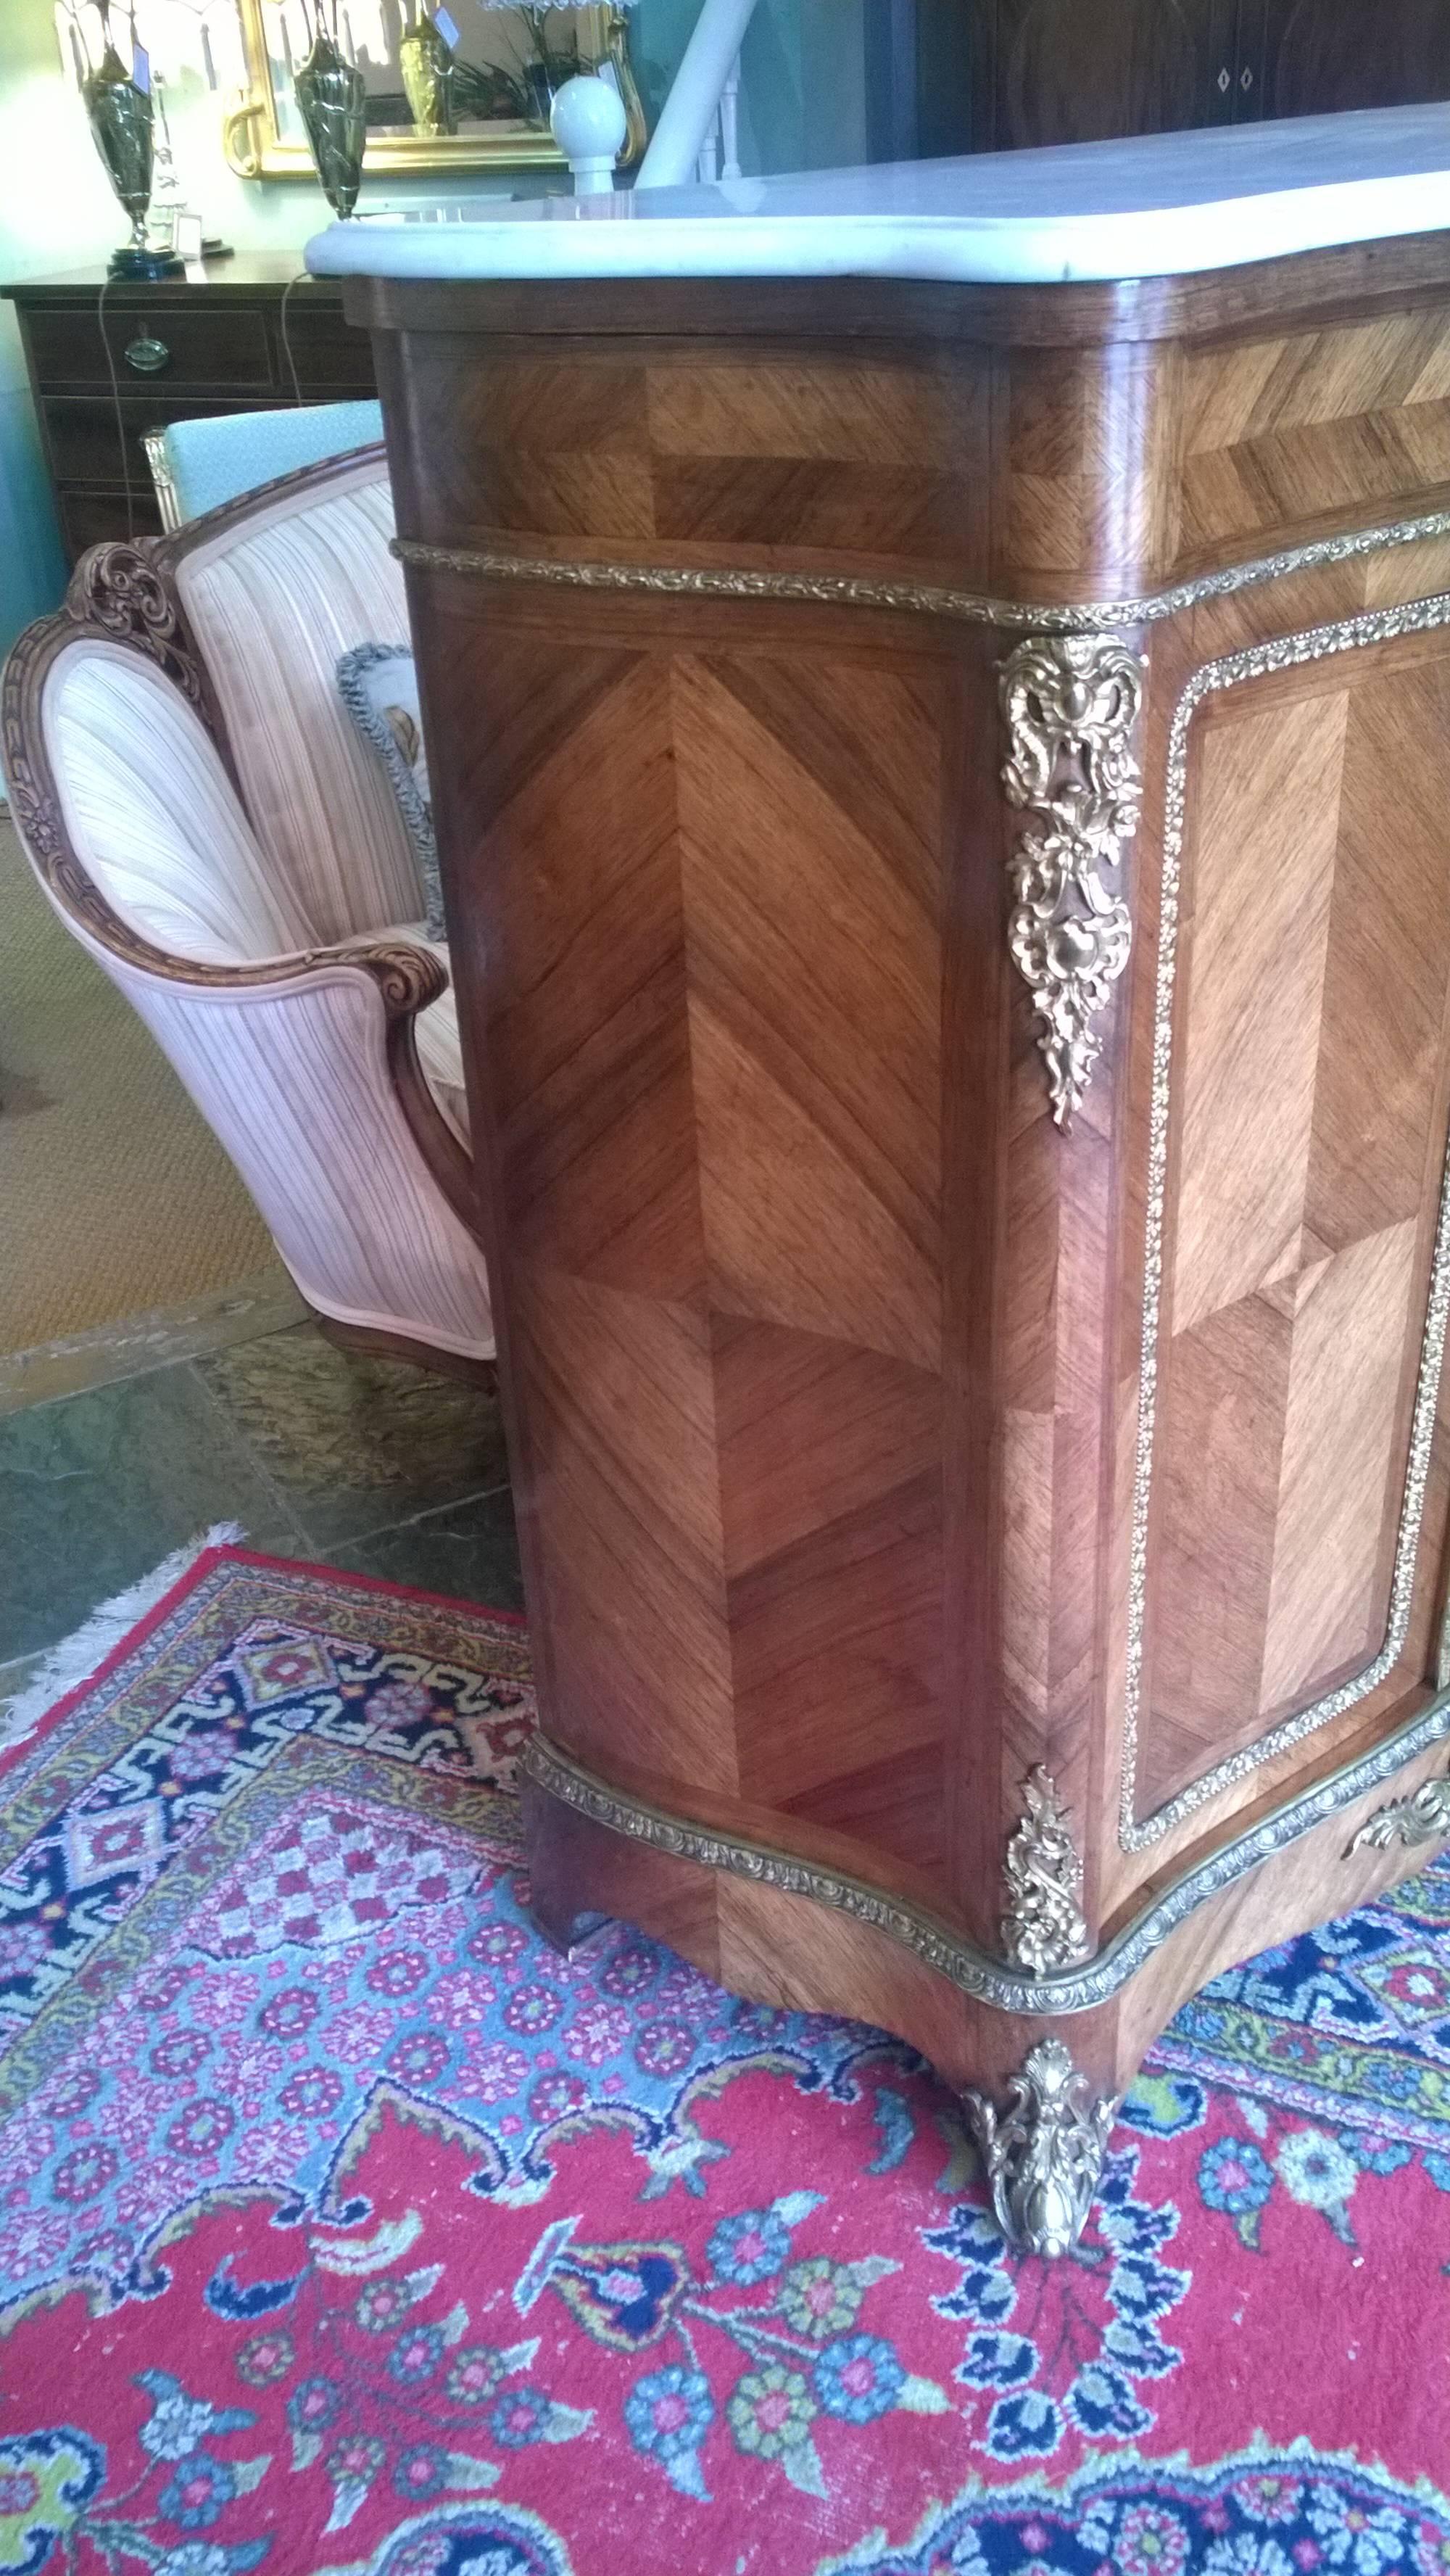 Late 19th Century French Kingwood Serpentine Salon Cabinet In Excellent Condition For Sale In Altrincham, Cheshire